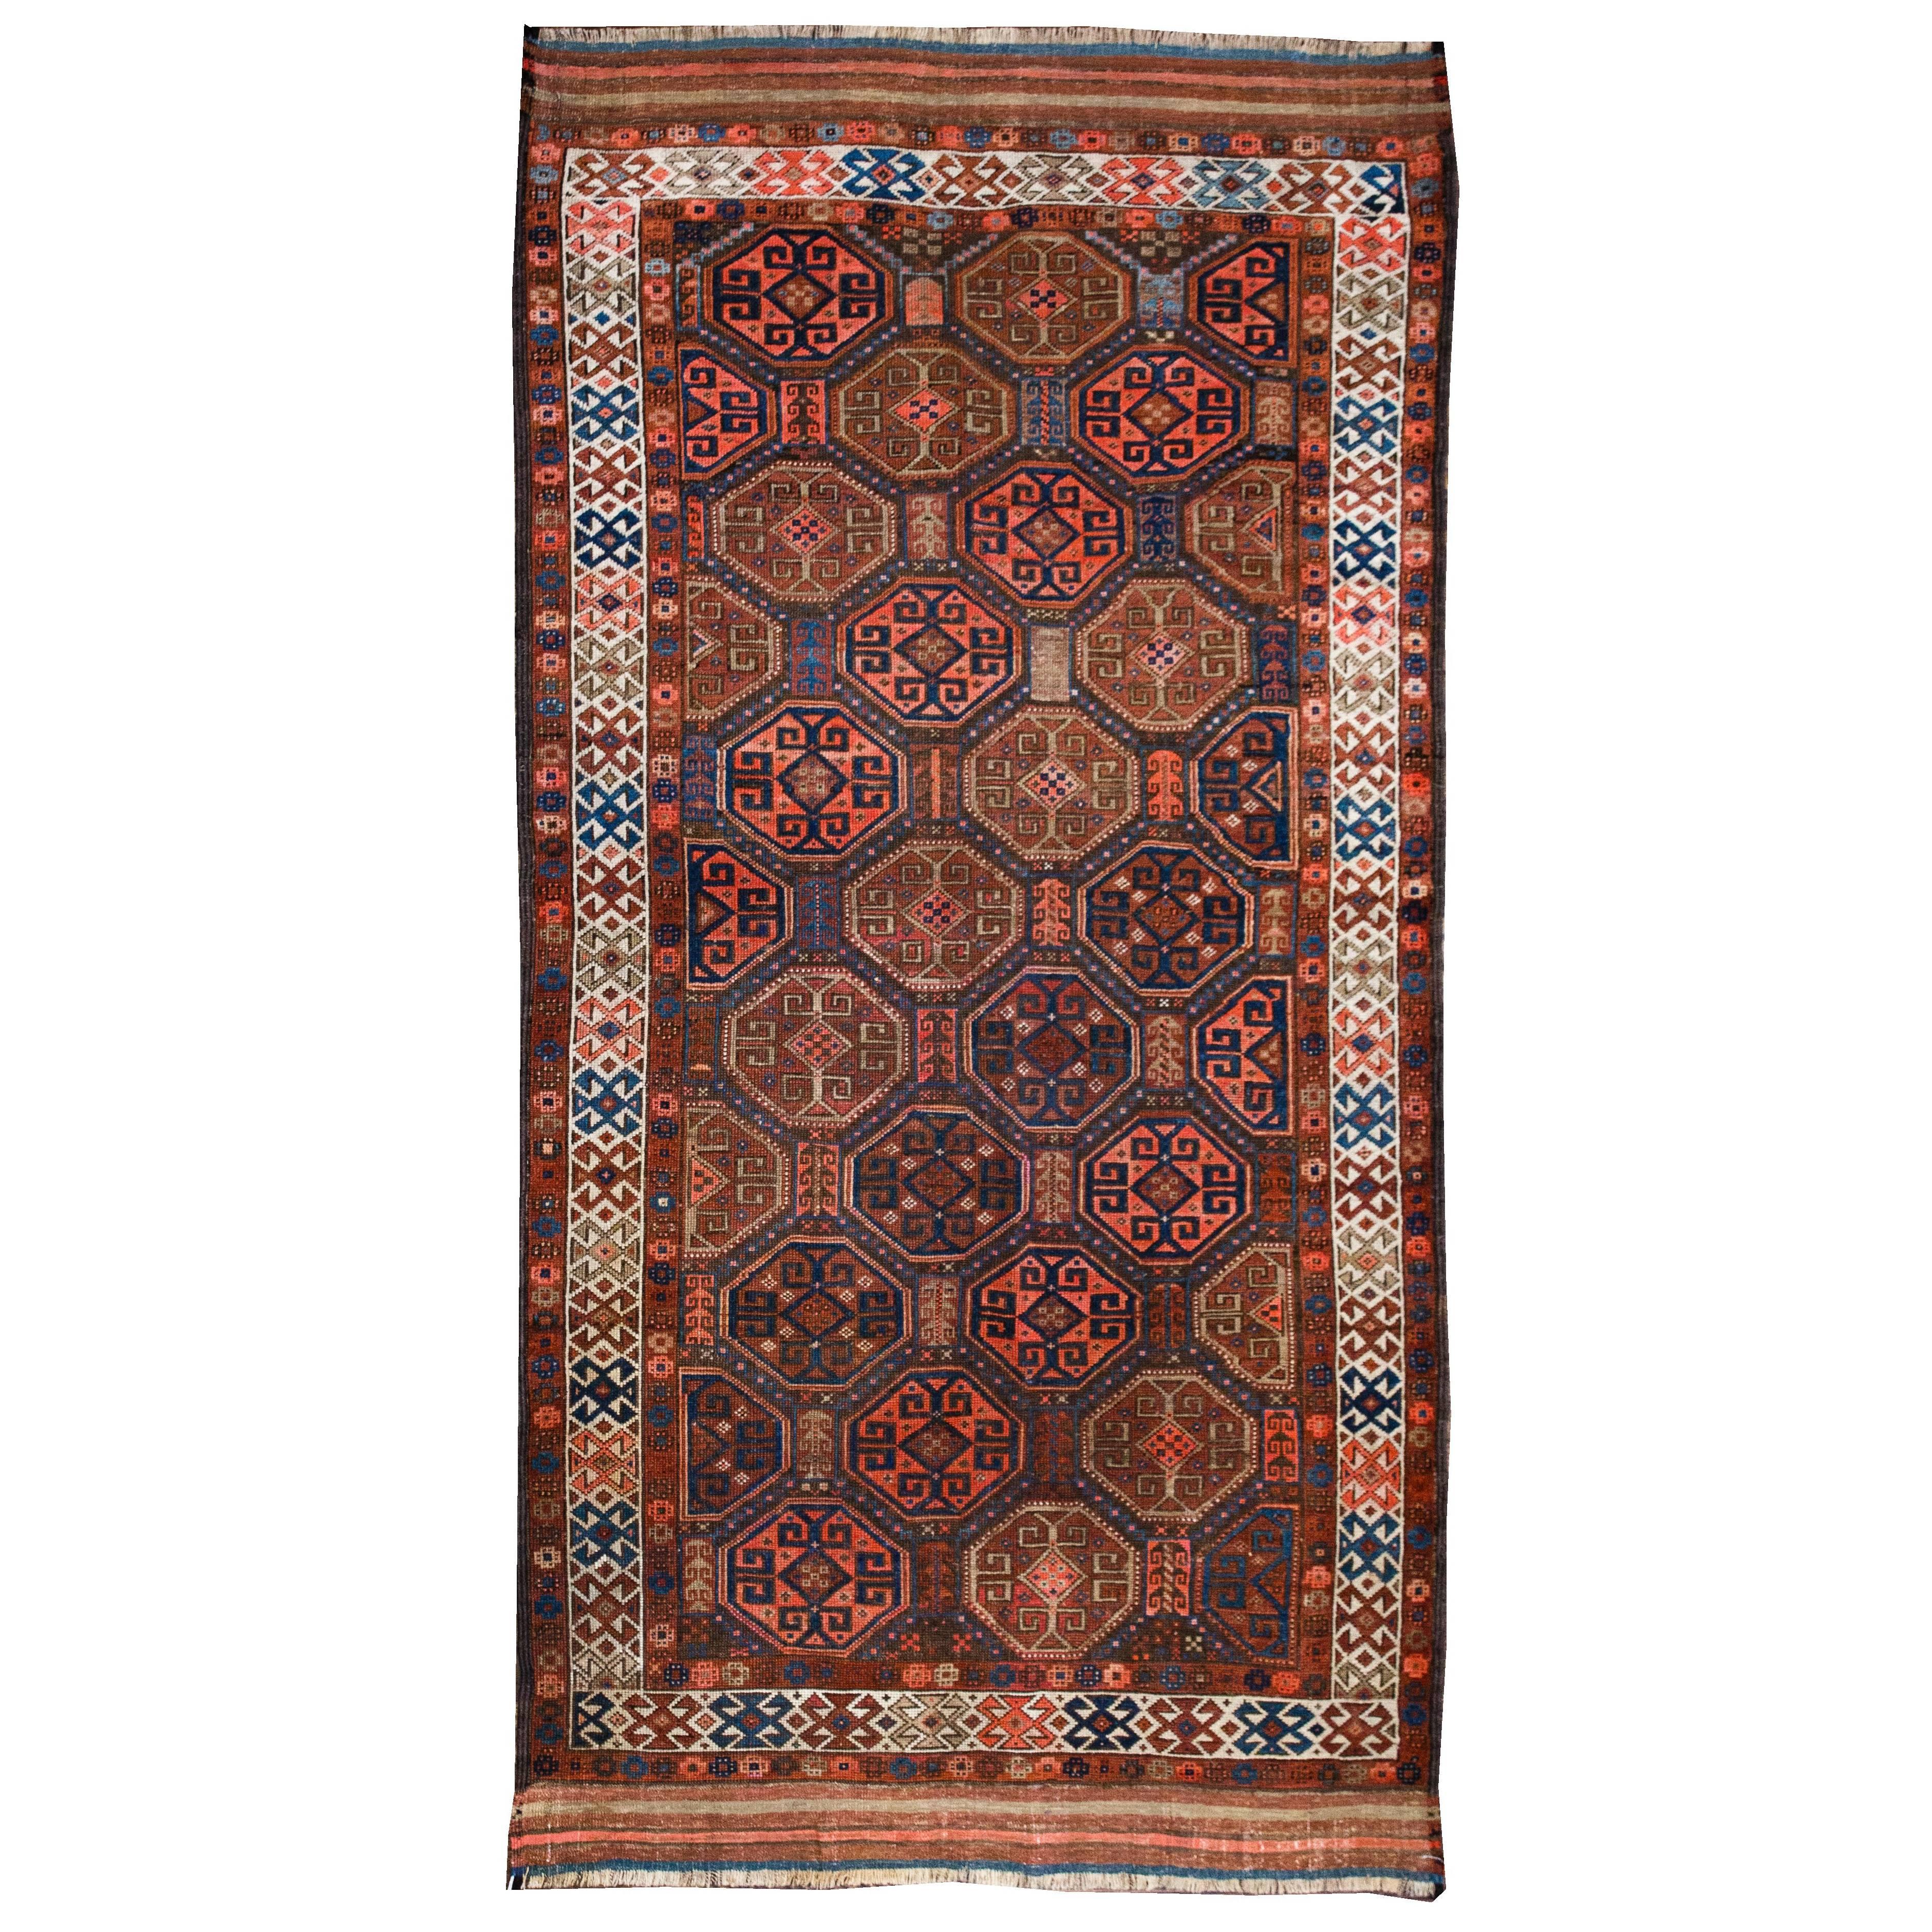 19th Century Baluch Rug from Afghanistan